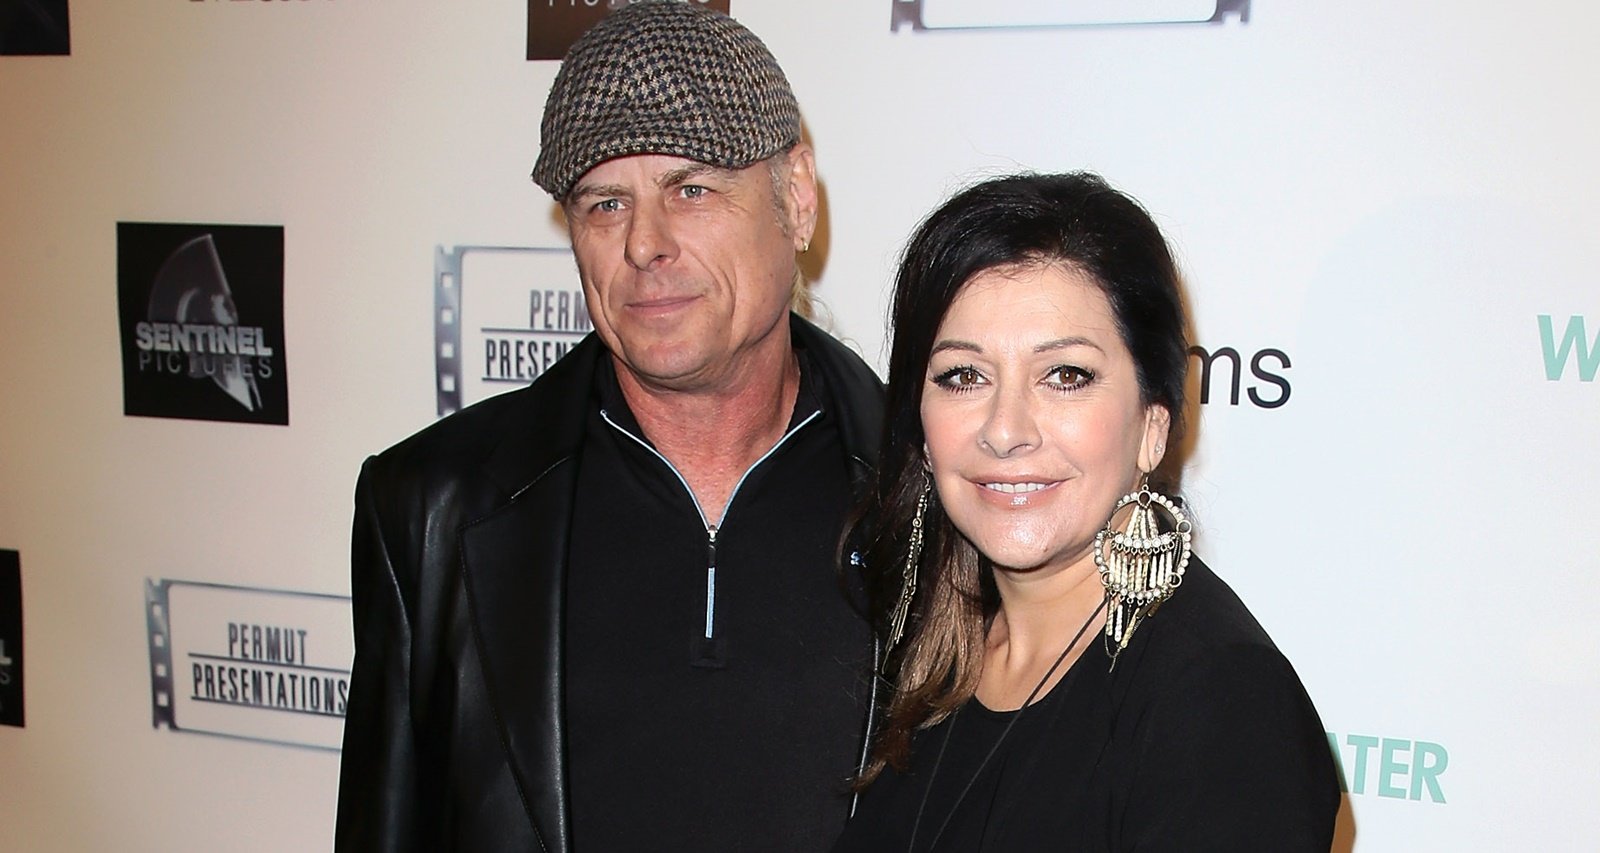 Marina Sirtis’ Musician Husband, Michael Lamper Wiki, Band, Early Life and Facts To Know